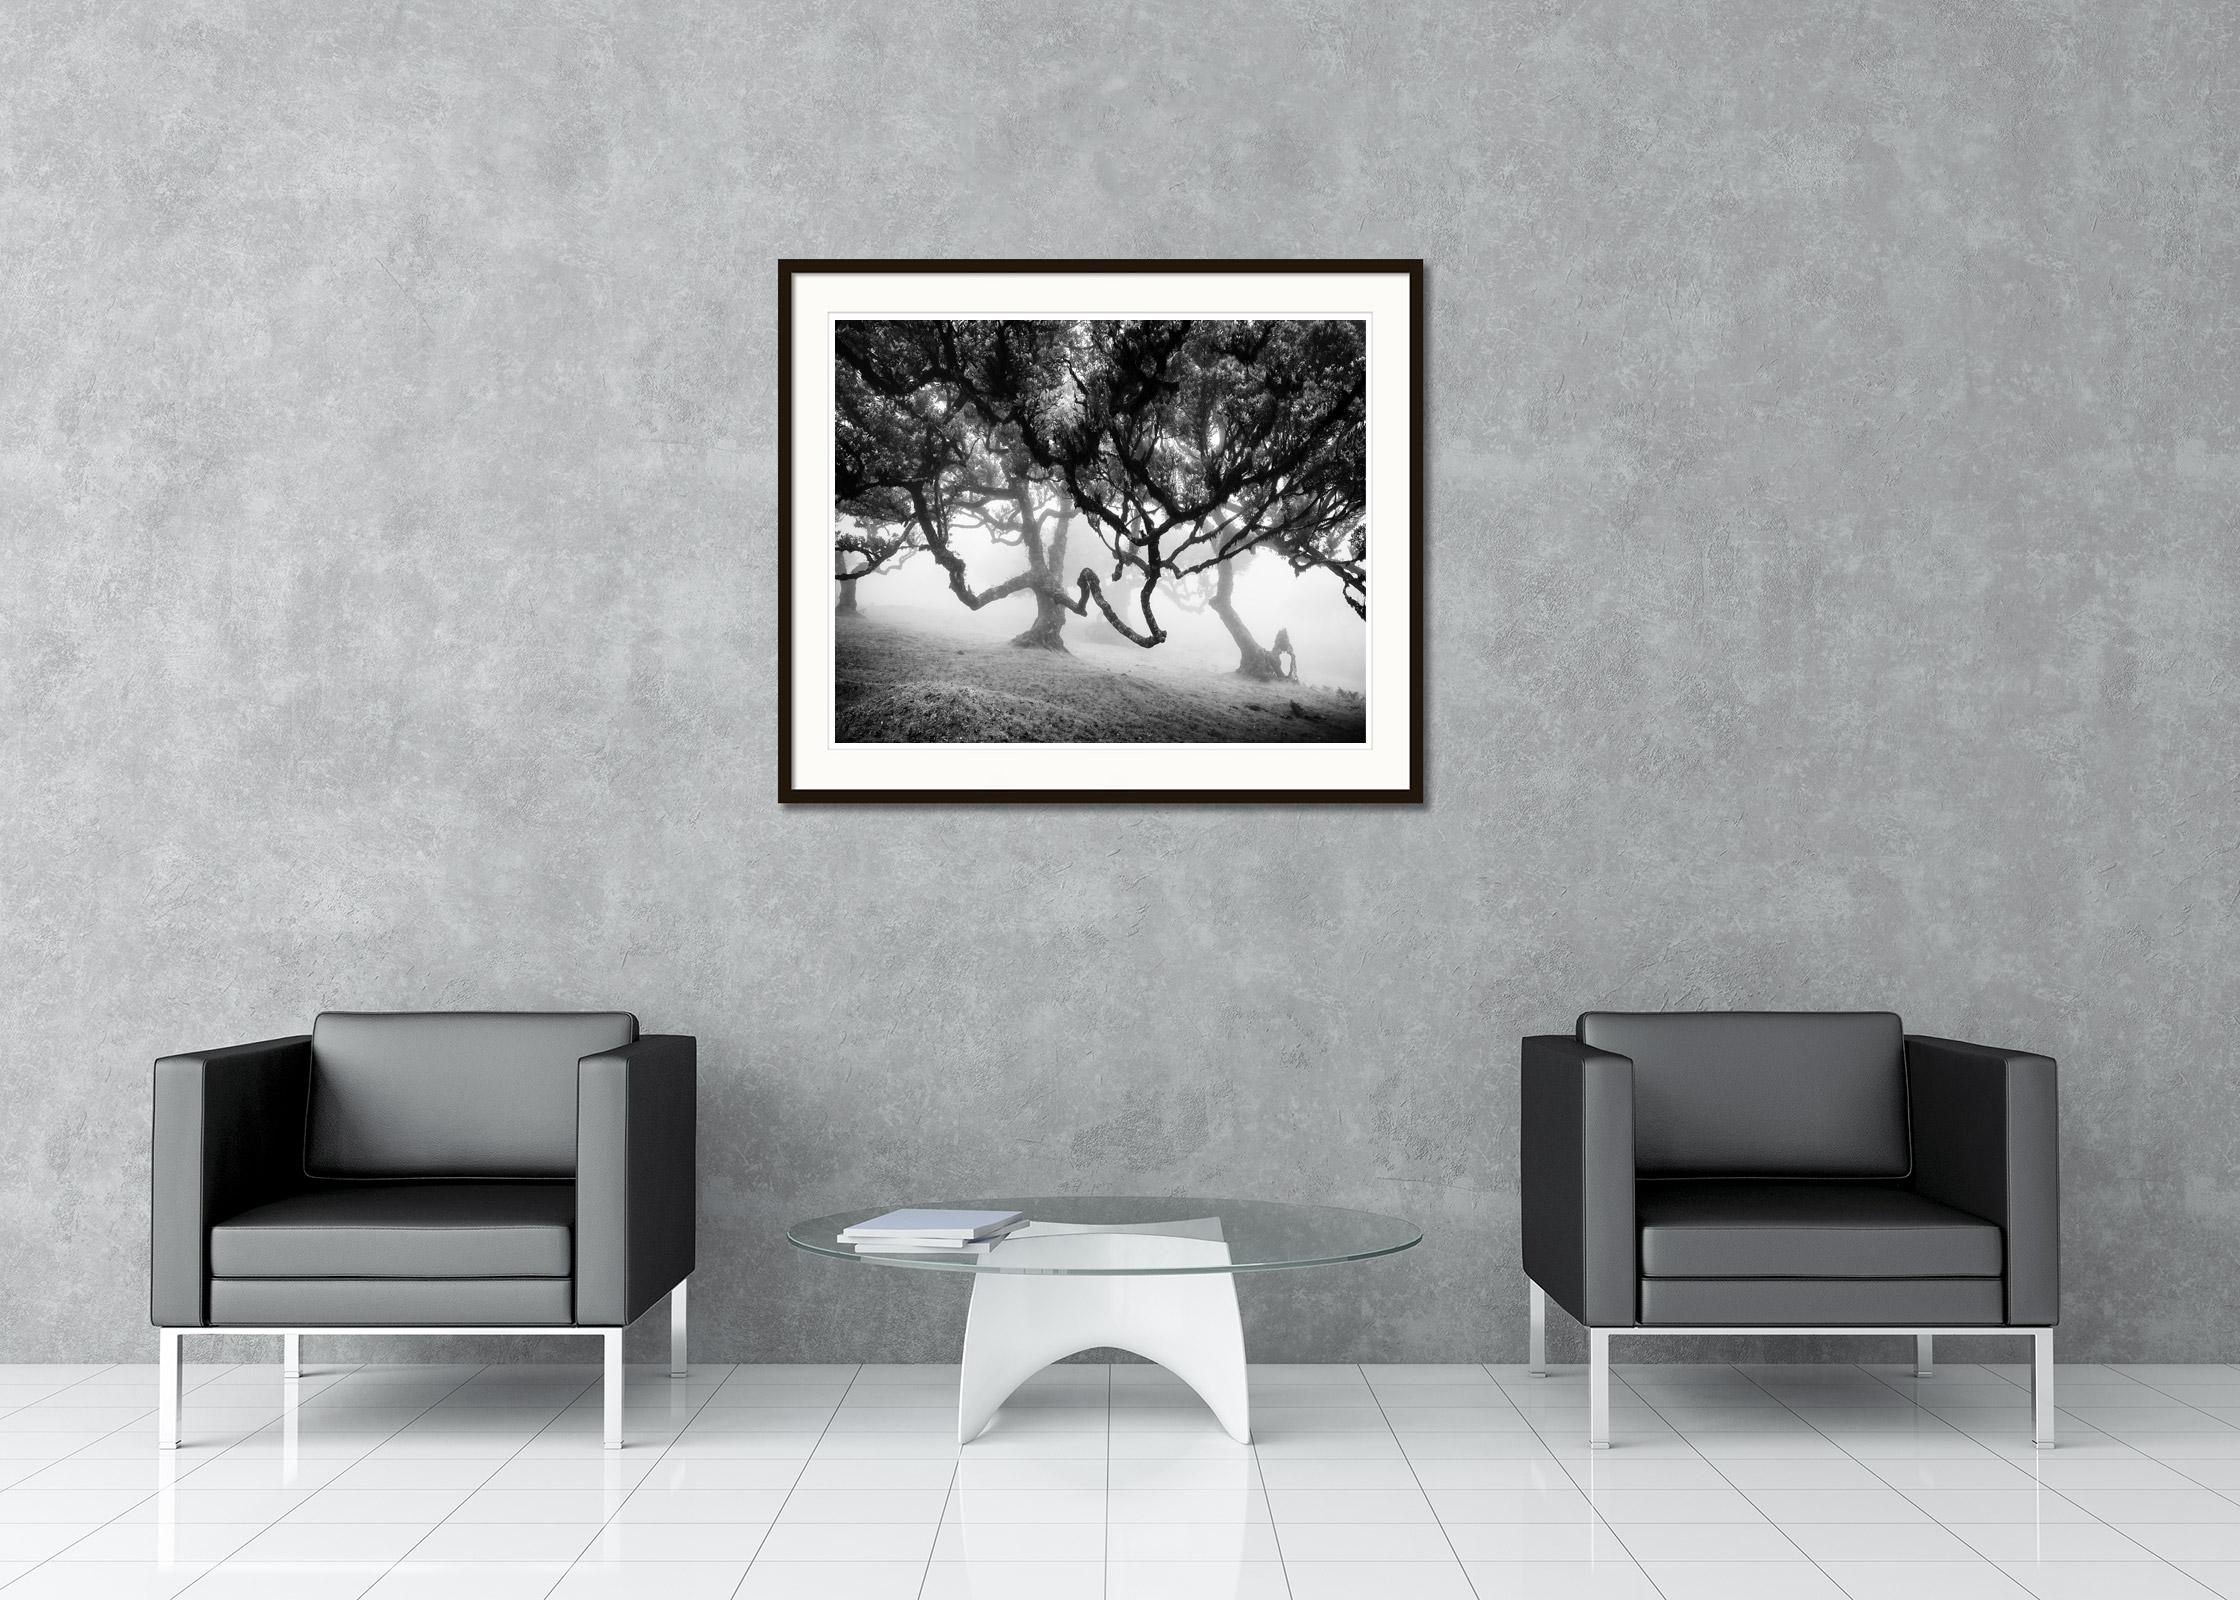 Black and White Fine Art Landscape Photography - Old Laurisilva tree in the fairy forest at foggy mystical mood, madeira. Archival pigment ink print, edition of 8. Signed, titled, dated and numbered by artist. Certificate of authenticity included.